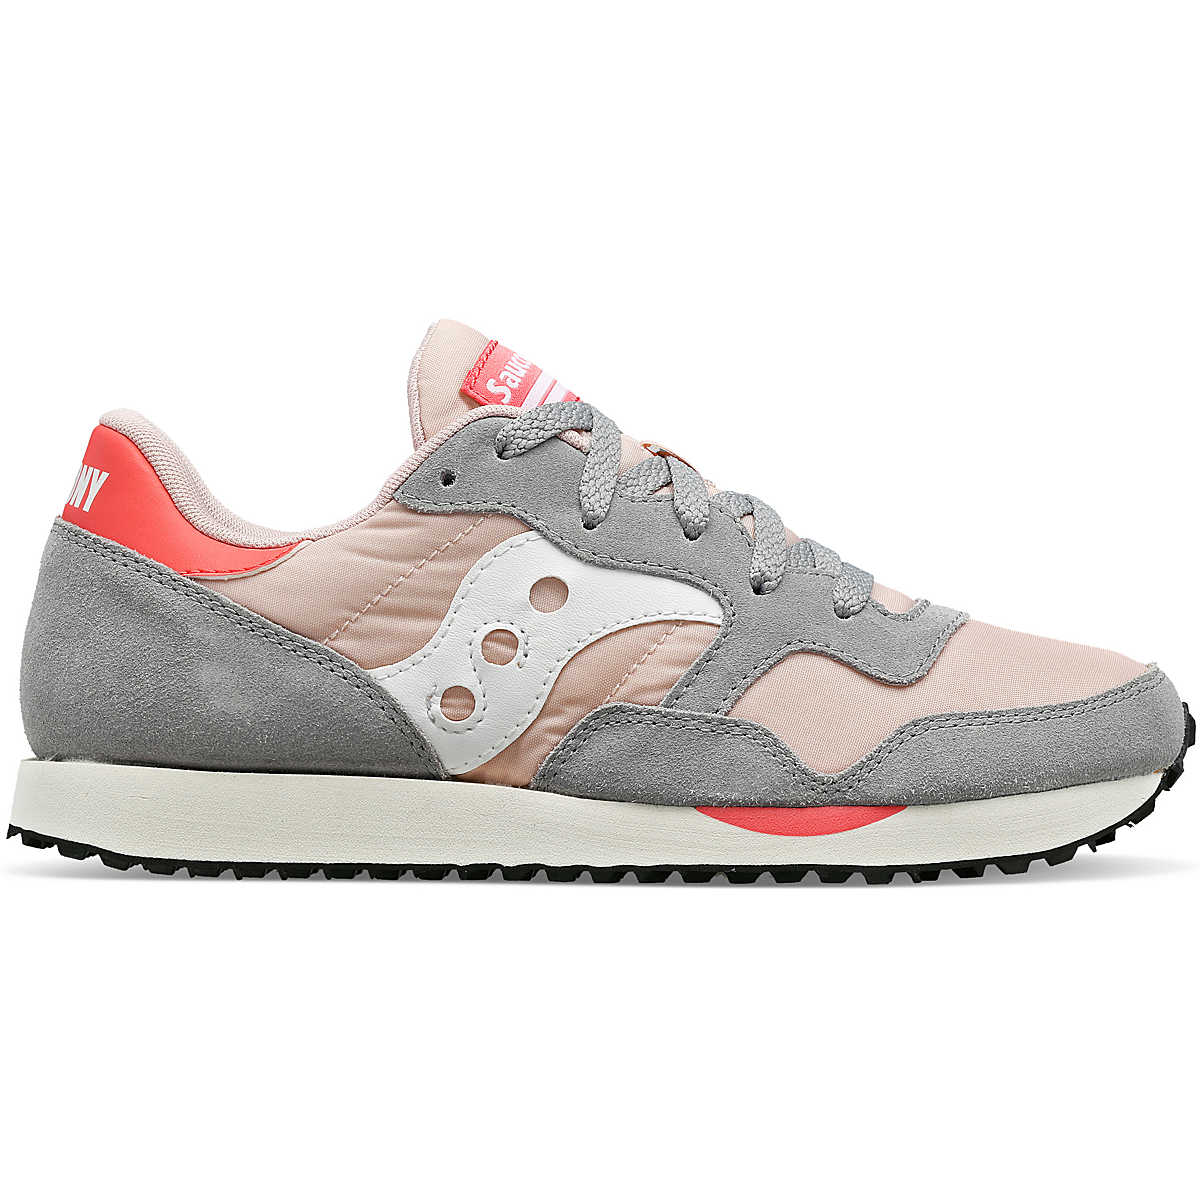 DXN Trainer, Grey | Pink, dynamic 1